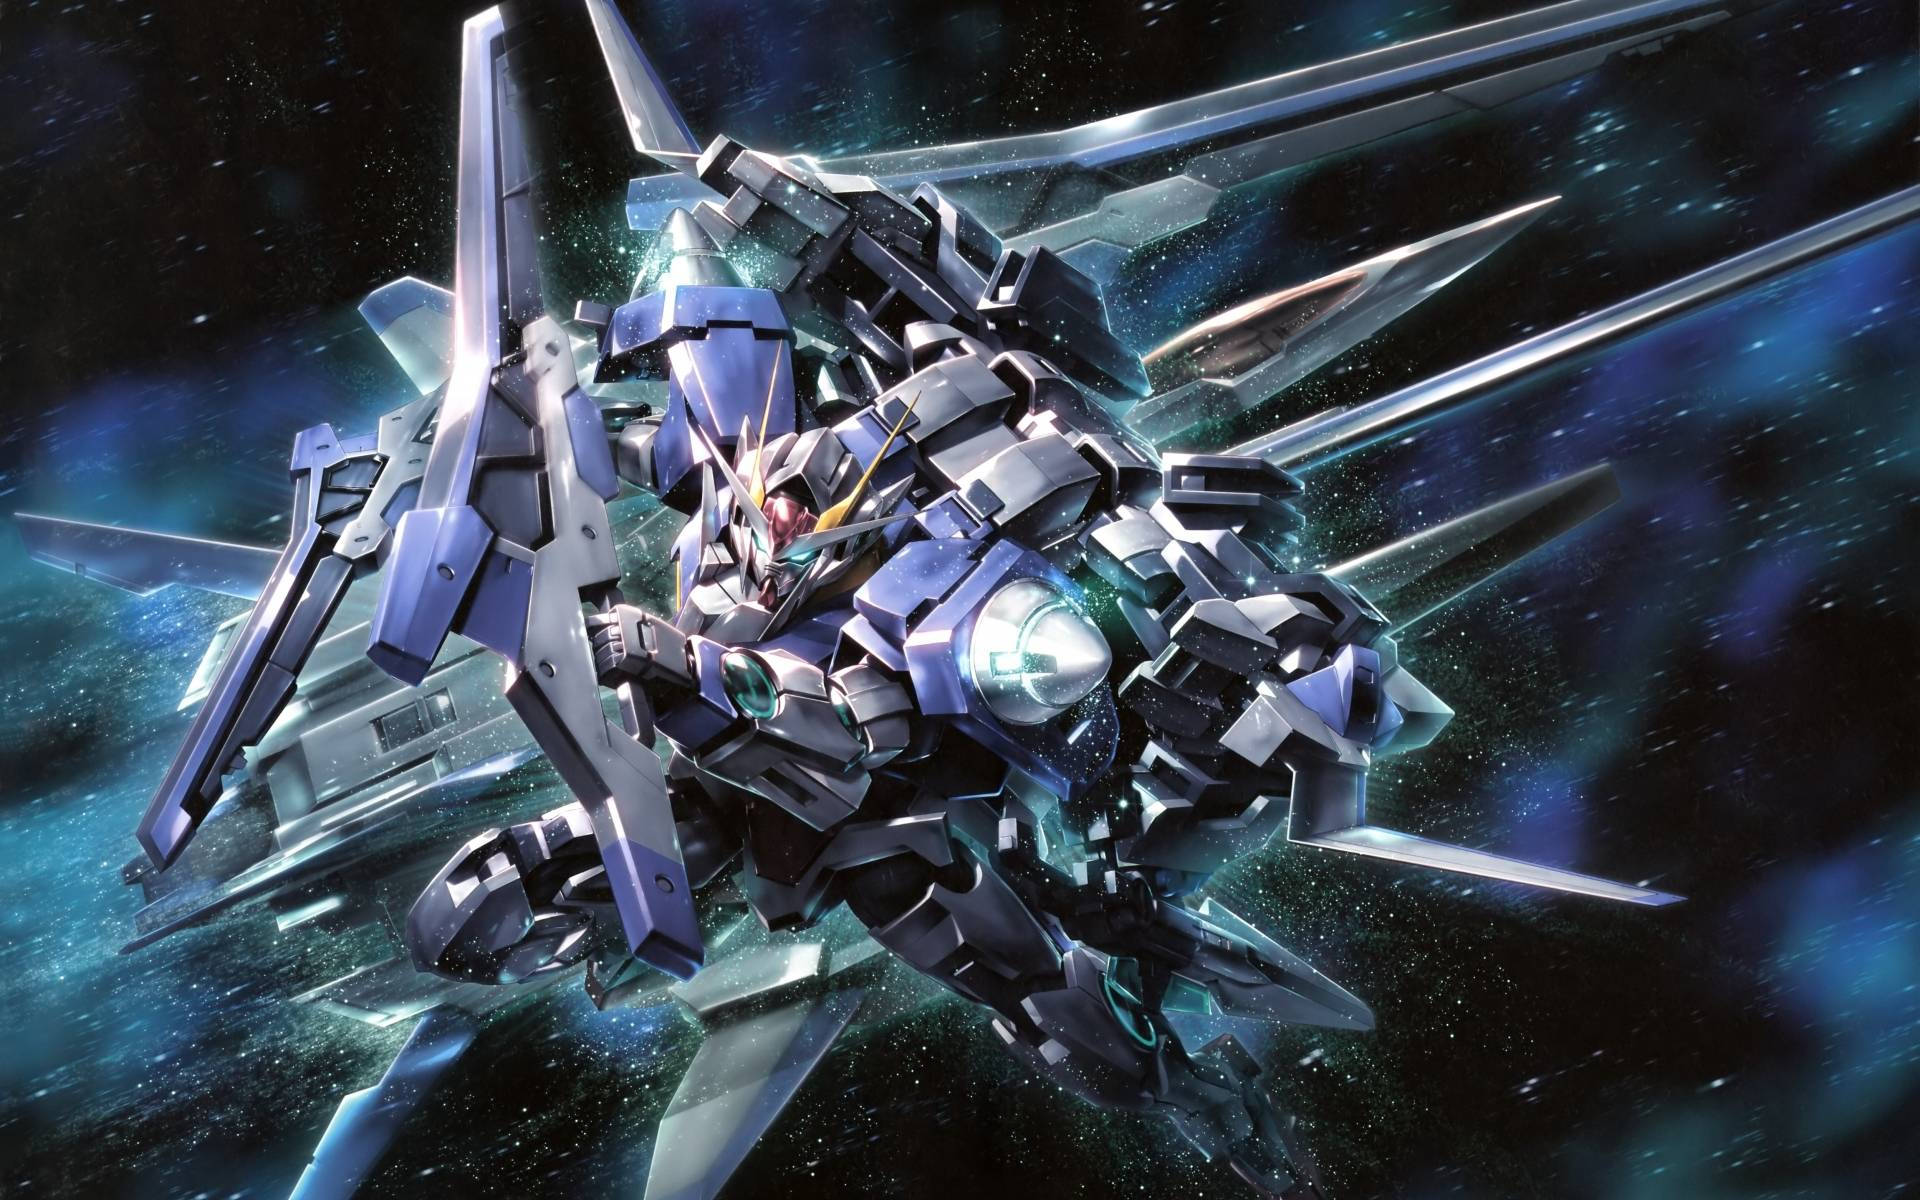 Pilot your own machine with the latest Gundam model Wallpaper